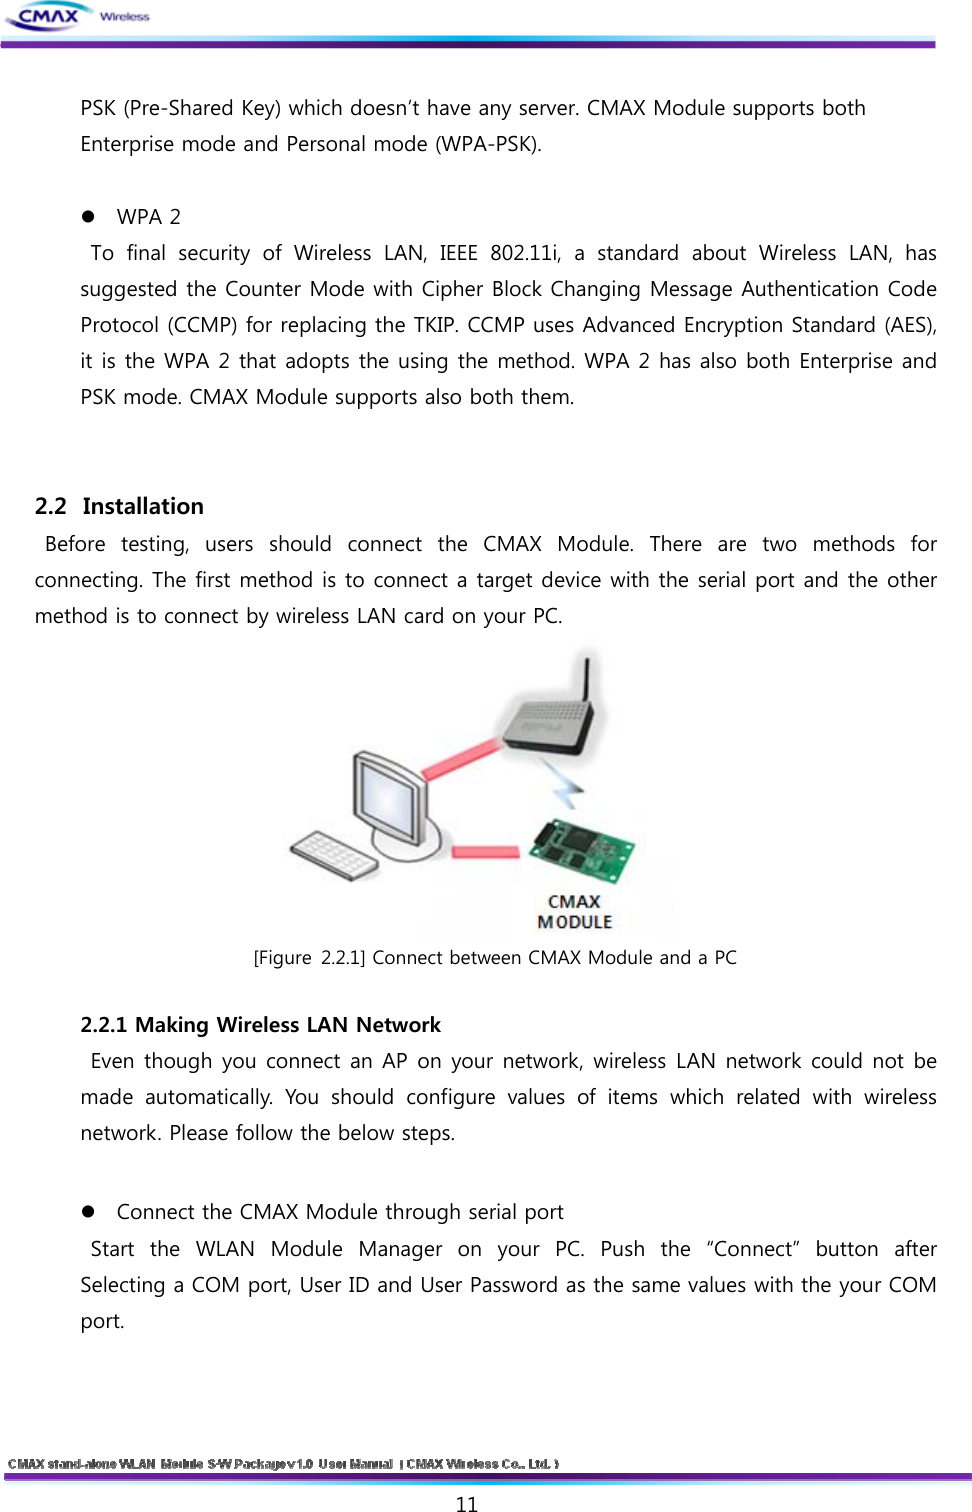   11  PSK (Pre-Shared Key) which doesn’t have any server. CMAX Module supports both Enterprise mode and Personal mode (WPA-PSK).    WPA 2   To  final  security  of  Wireless  LAN,  IEEE  802.11i,  a  standard  about  Wireless  LAN,  has suggested the Counter Mode with Cipher Block Changing Message Authentication Code Protocol (CCMP) for replacing the TKIP. CCMP uses Advanced Encryption Standard (AES), it is the WPA 2 that adopts the using the method. WPA 2 has also both Enterprise and PSK mode. CMAX Module supports also both them.   2.2   Installation   Before  testing,  users  should  connect the CMAX Module. There are two methods for connecting. The first method is to connect a target device with the serial port and the other method is to connect by wireless LAN card on your PC.    [Figure 2.2.1] Connect between CMAX Module and a PC  2.2.1 Making Wireless LAN Network   Even though you connect an AP on your network, wireless LAN network could not be made automatically. You should configure values of items which related  with  wireless network. Please follow the below steps.  Connect the CMAX Module through serial port   Start  the  WLAN  Module  Manager  on  your  PC.  Push  the  “Connect”  button  after Selecting a COM port, User ID and User Password as the same values with the your COM port.  